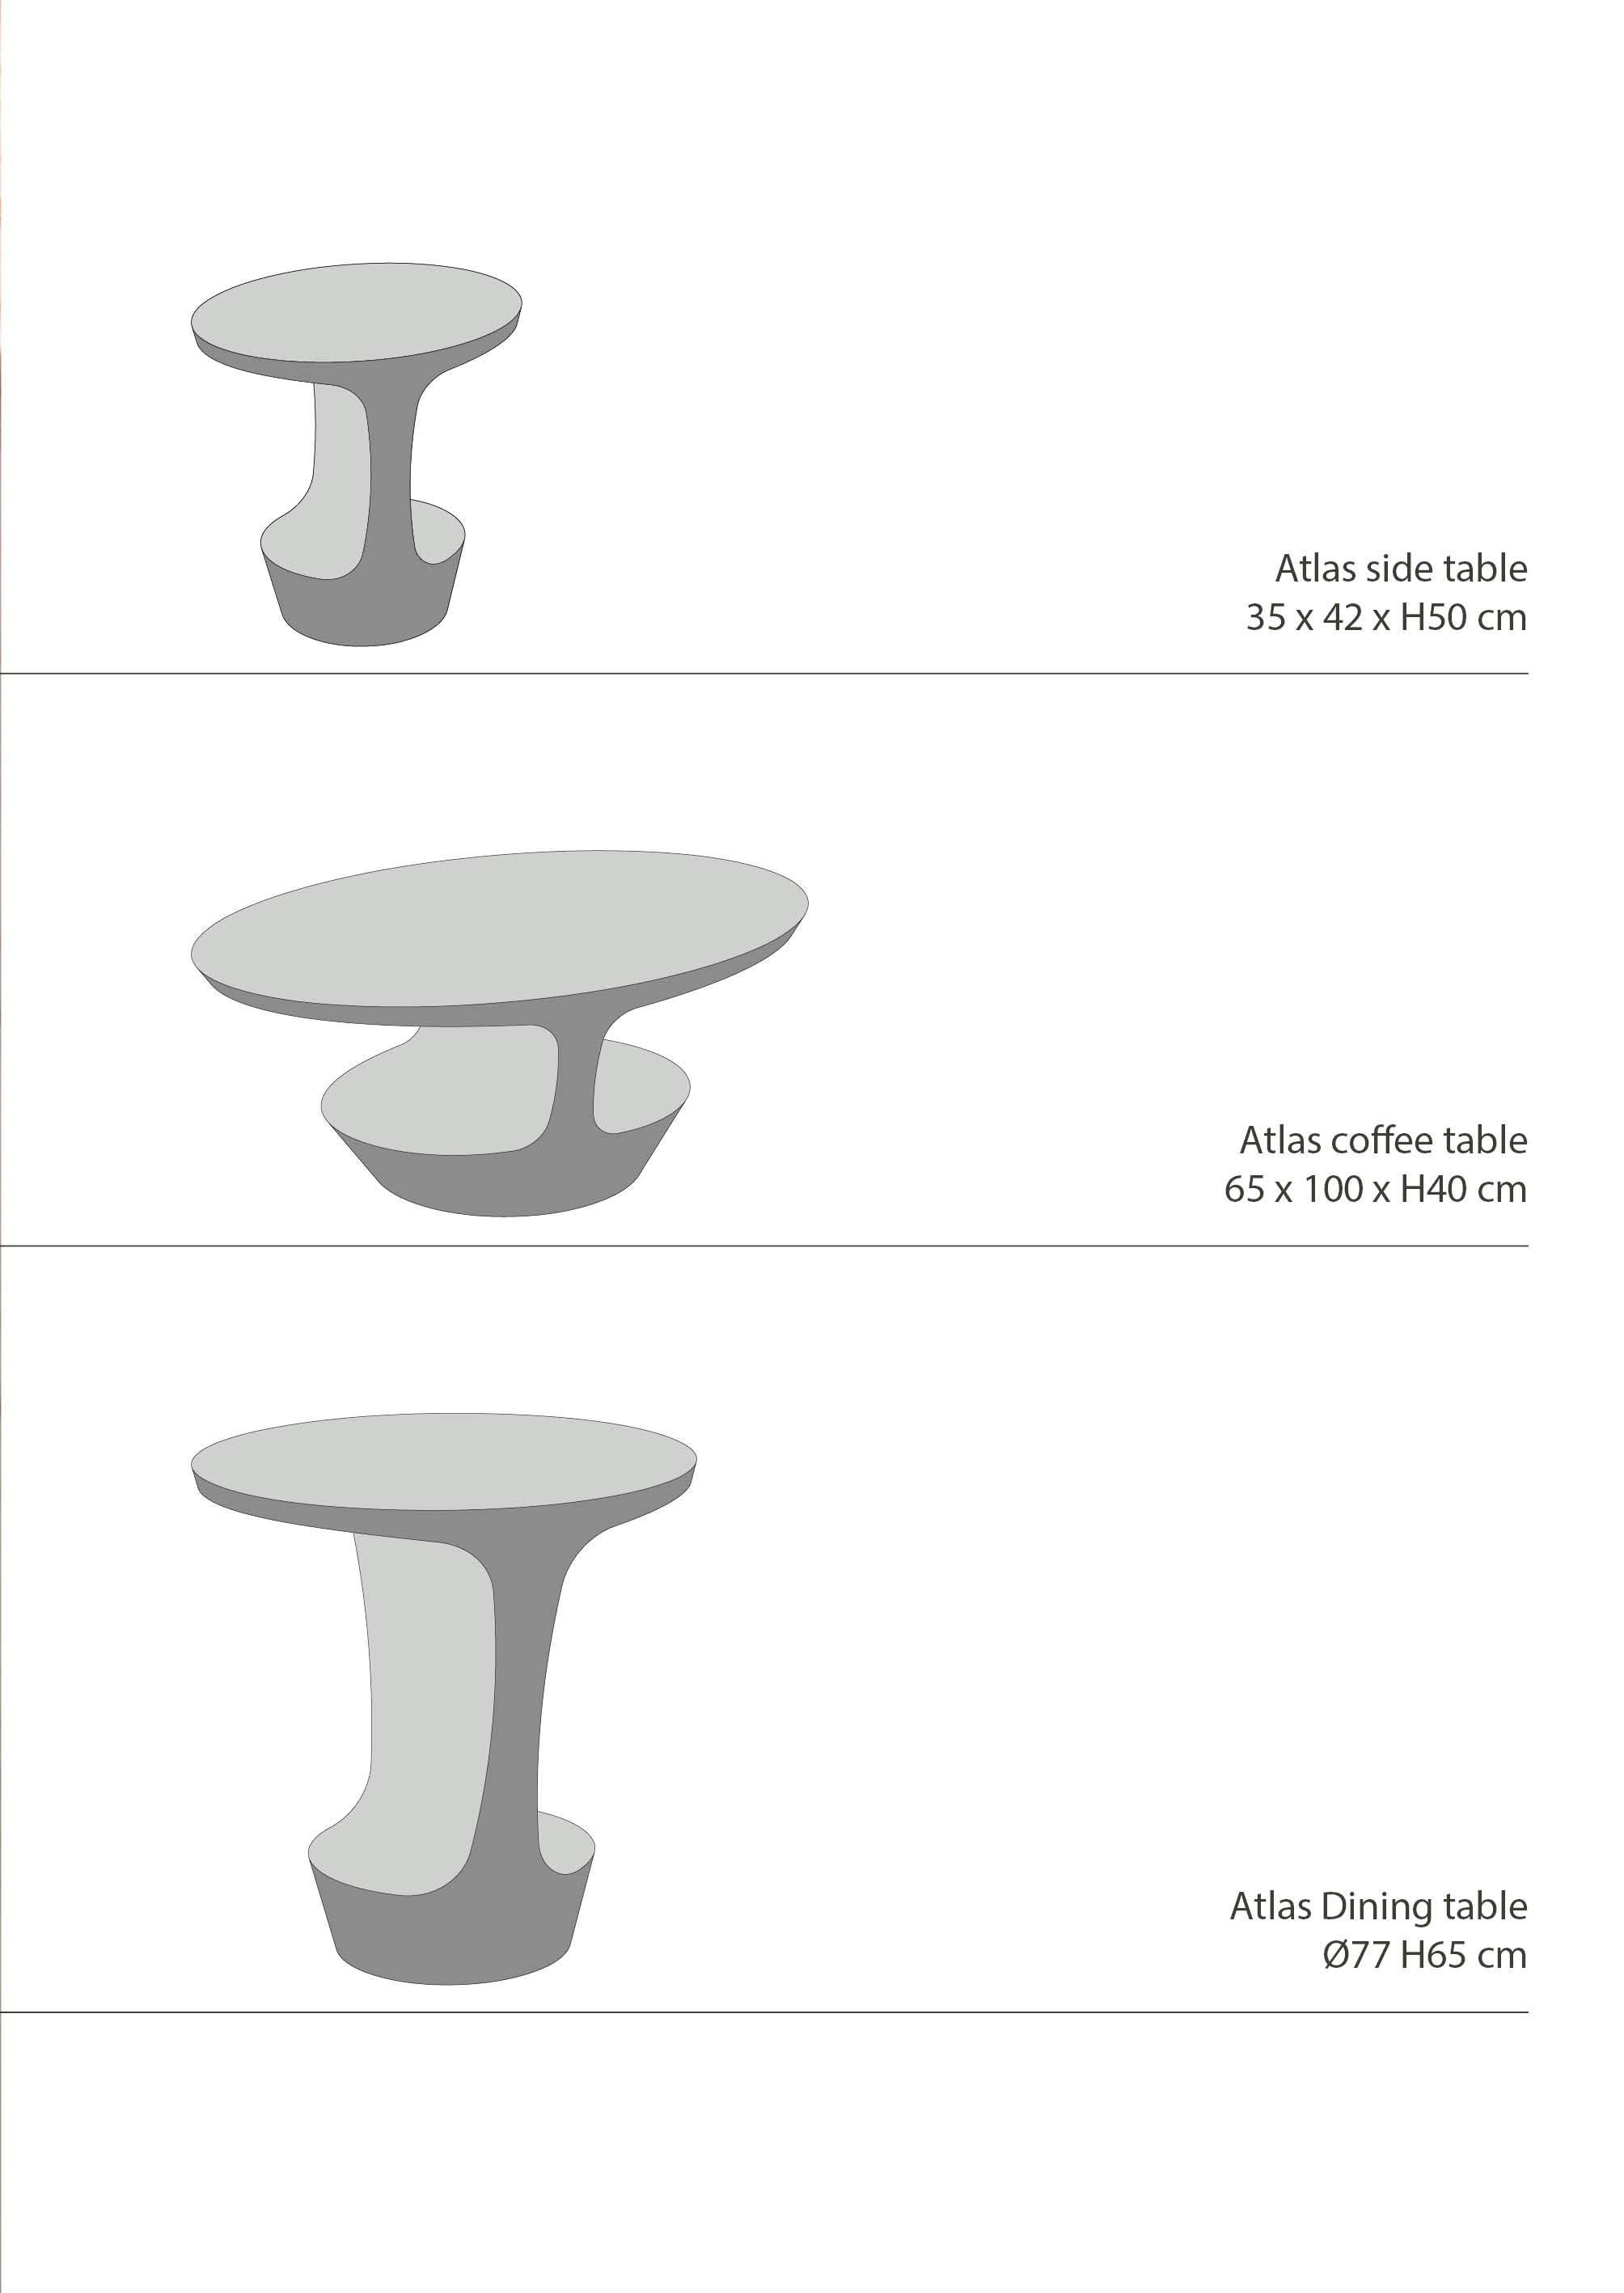 Chinese Atlas Side Table in Orobico Marble by Adolfo Abejon for Formar For Sale